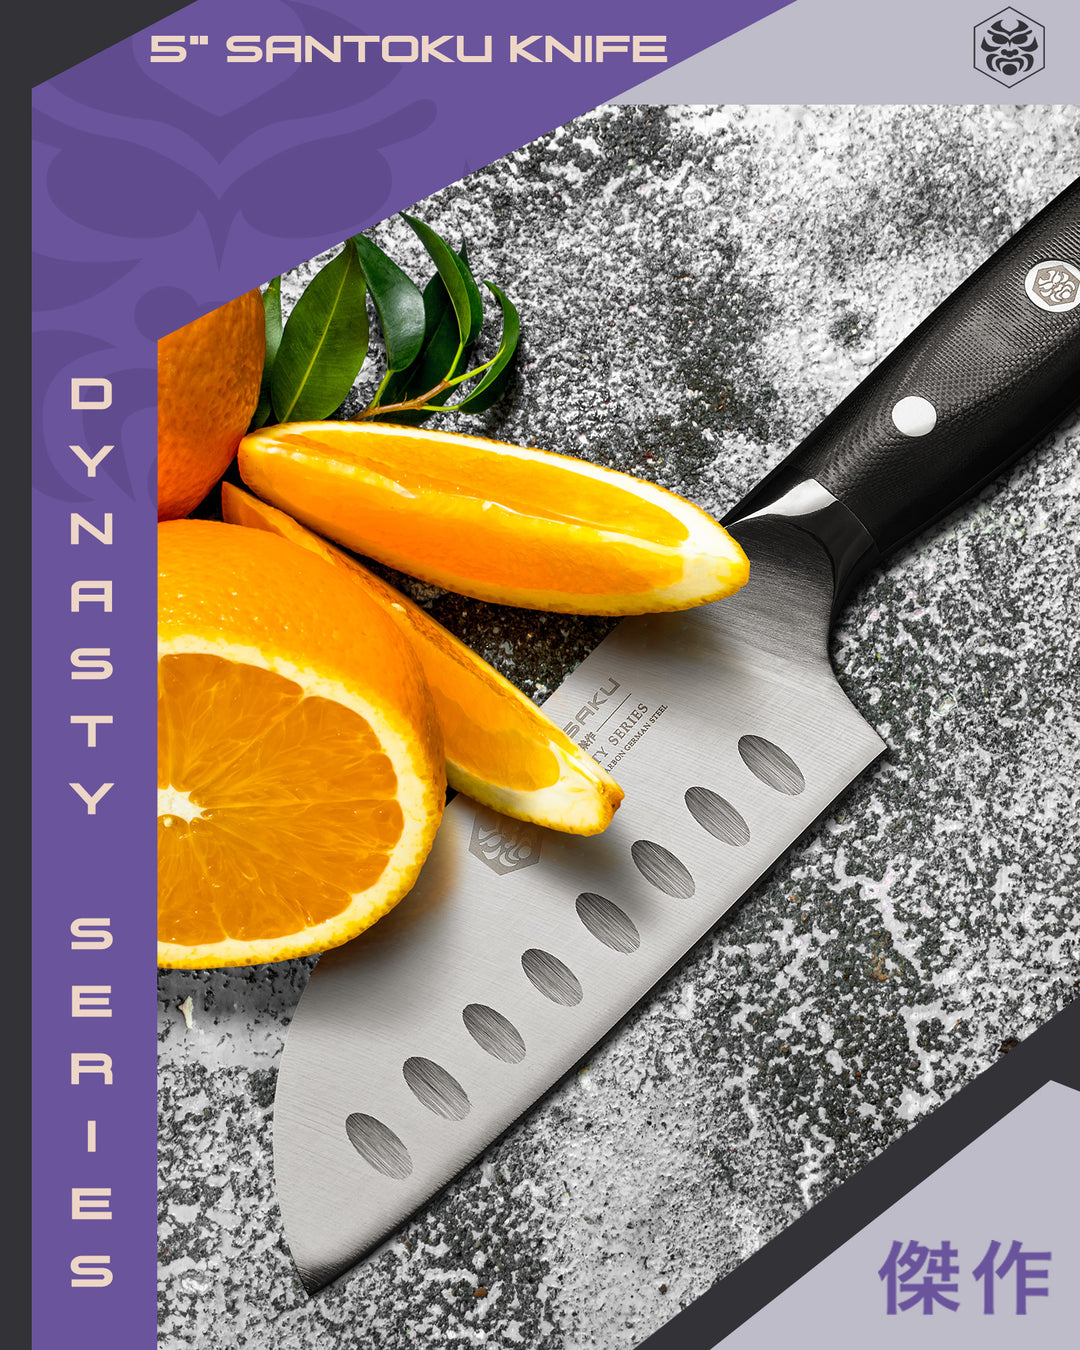 The Dynasty 5" Santoku after chopped and sliced oranges